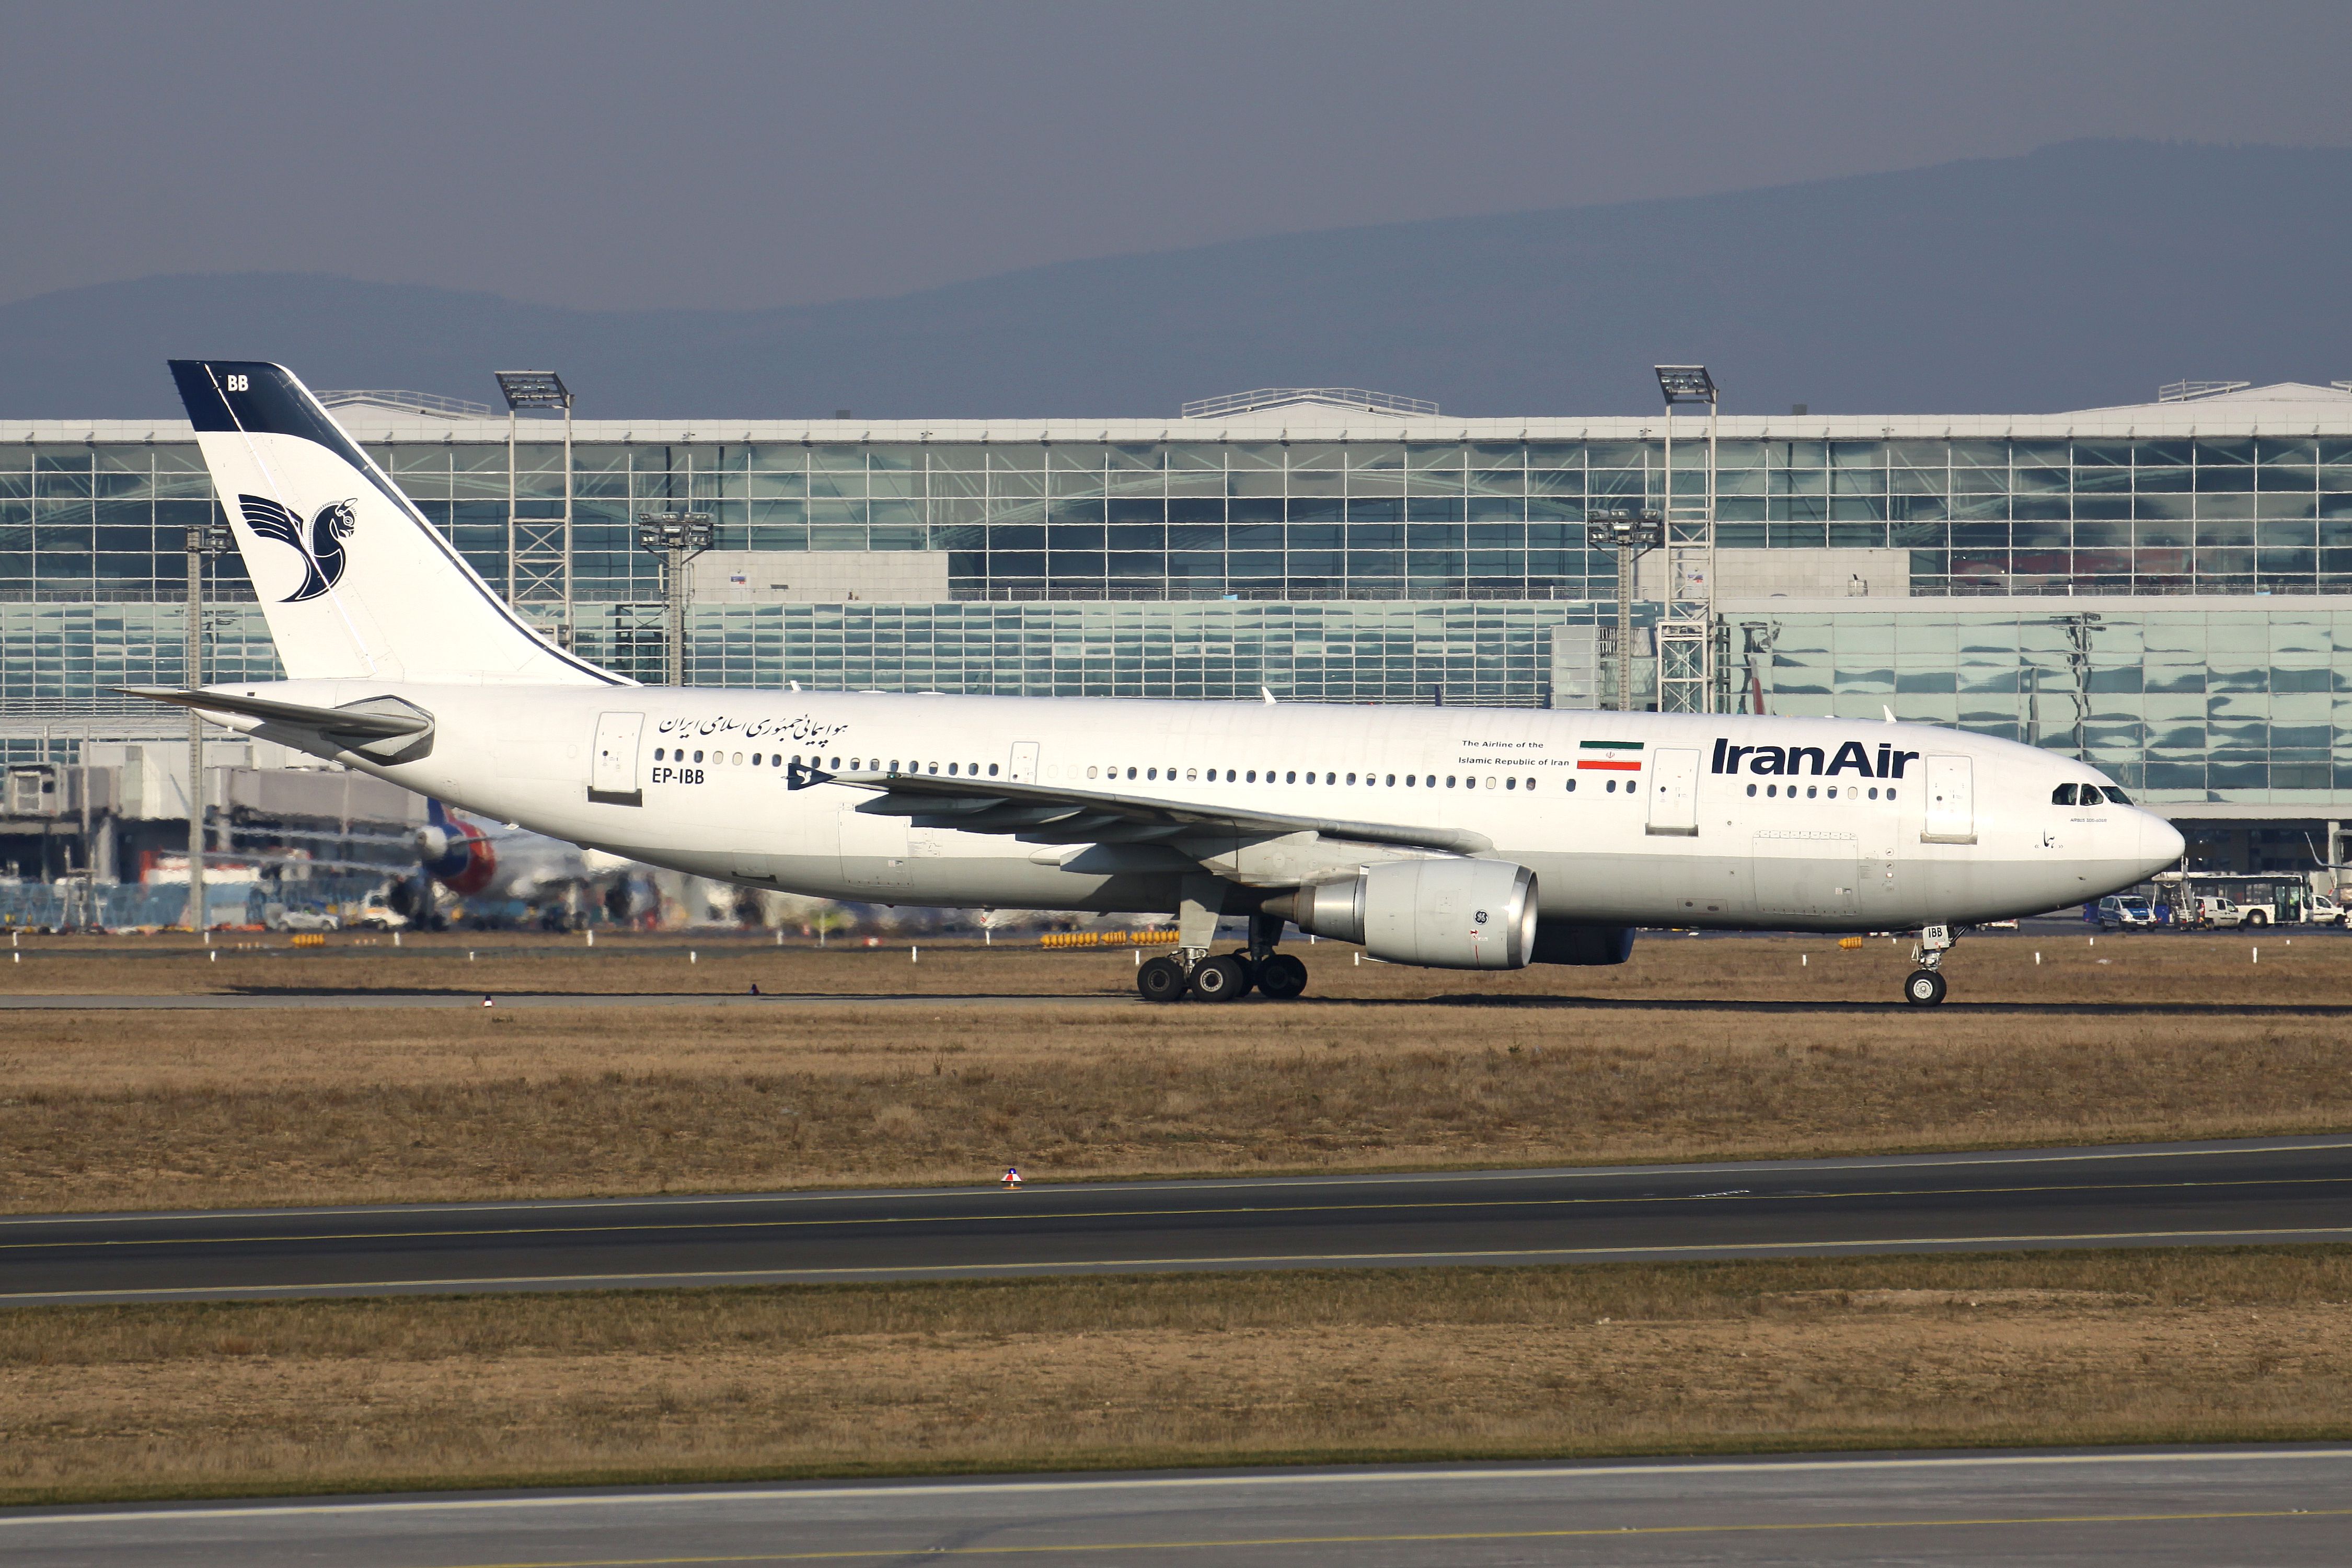 An Iran Air Airbus A300 taxiing to the runway.